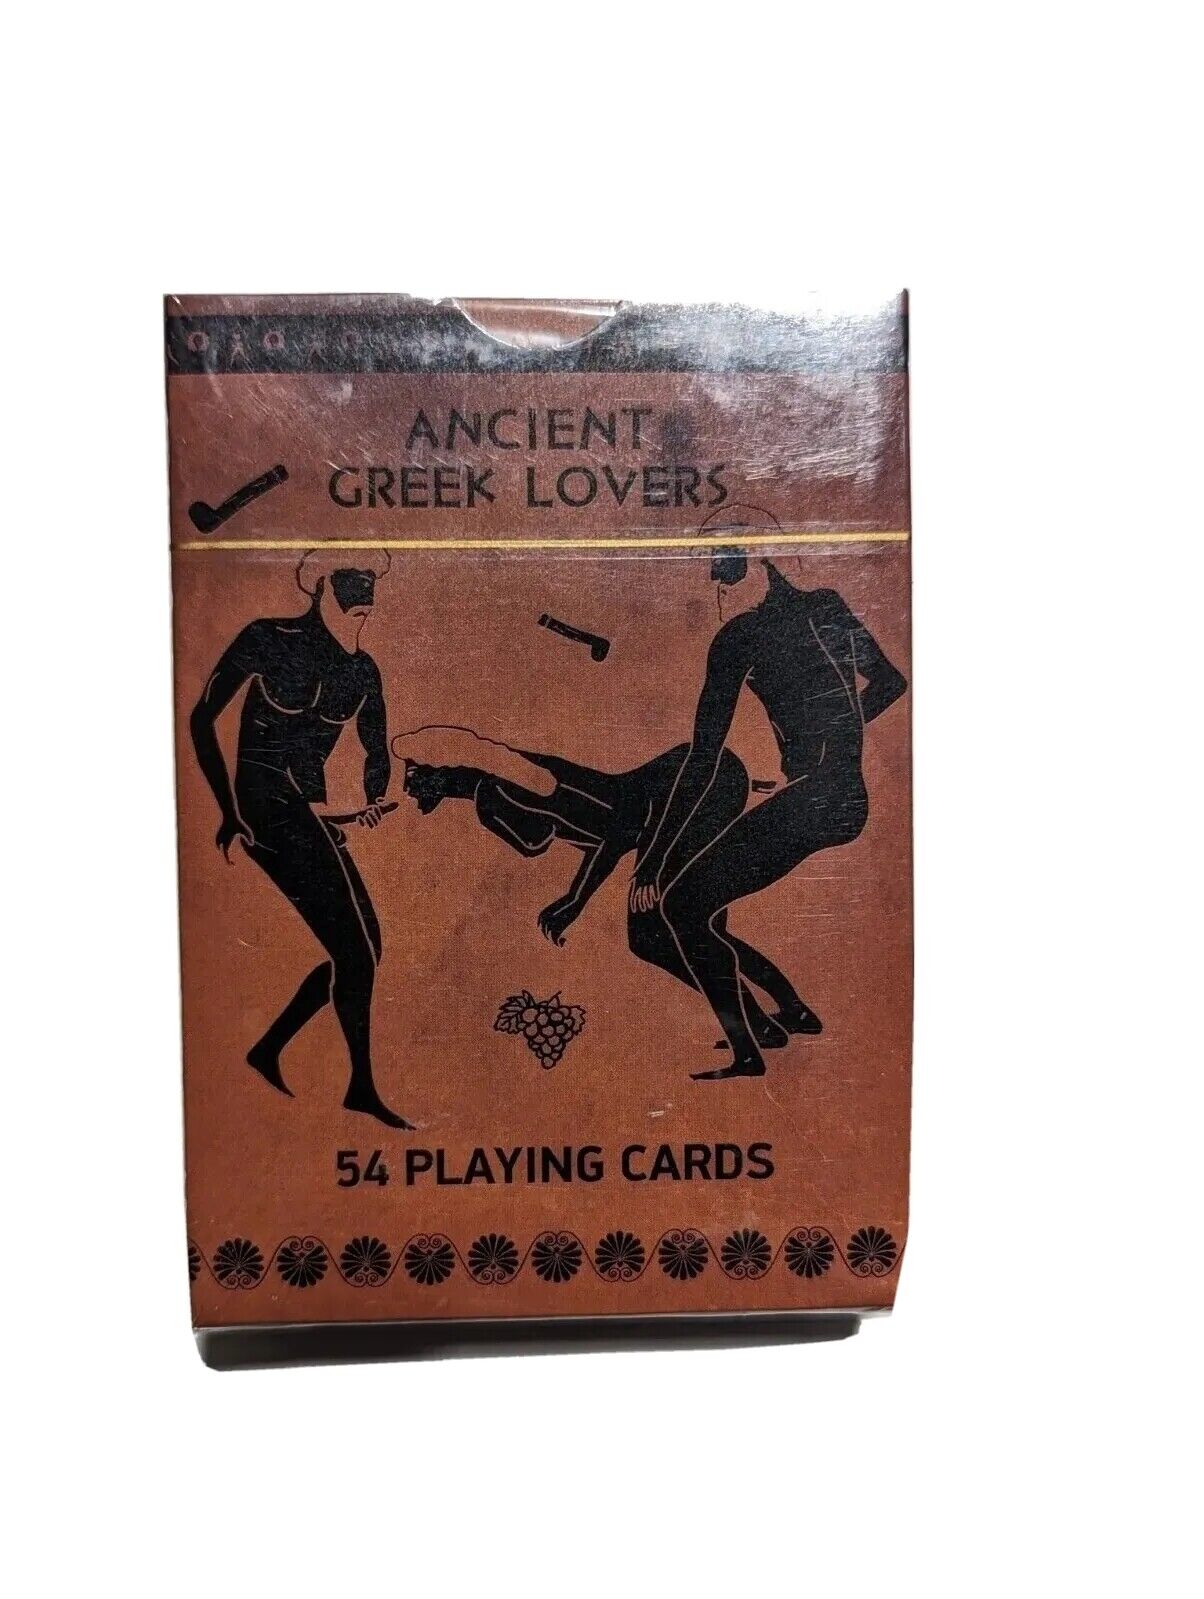  Ancient Greek Lovers sex playing cards 